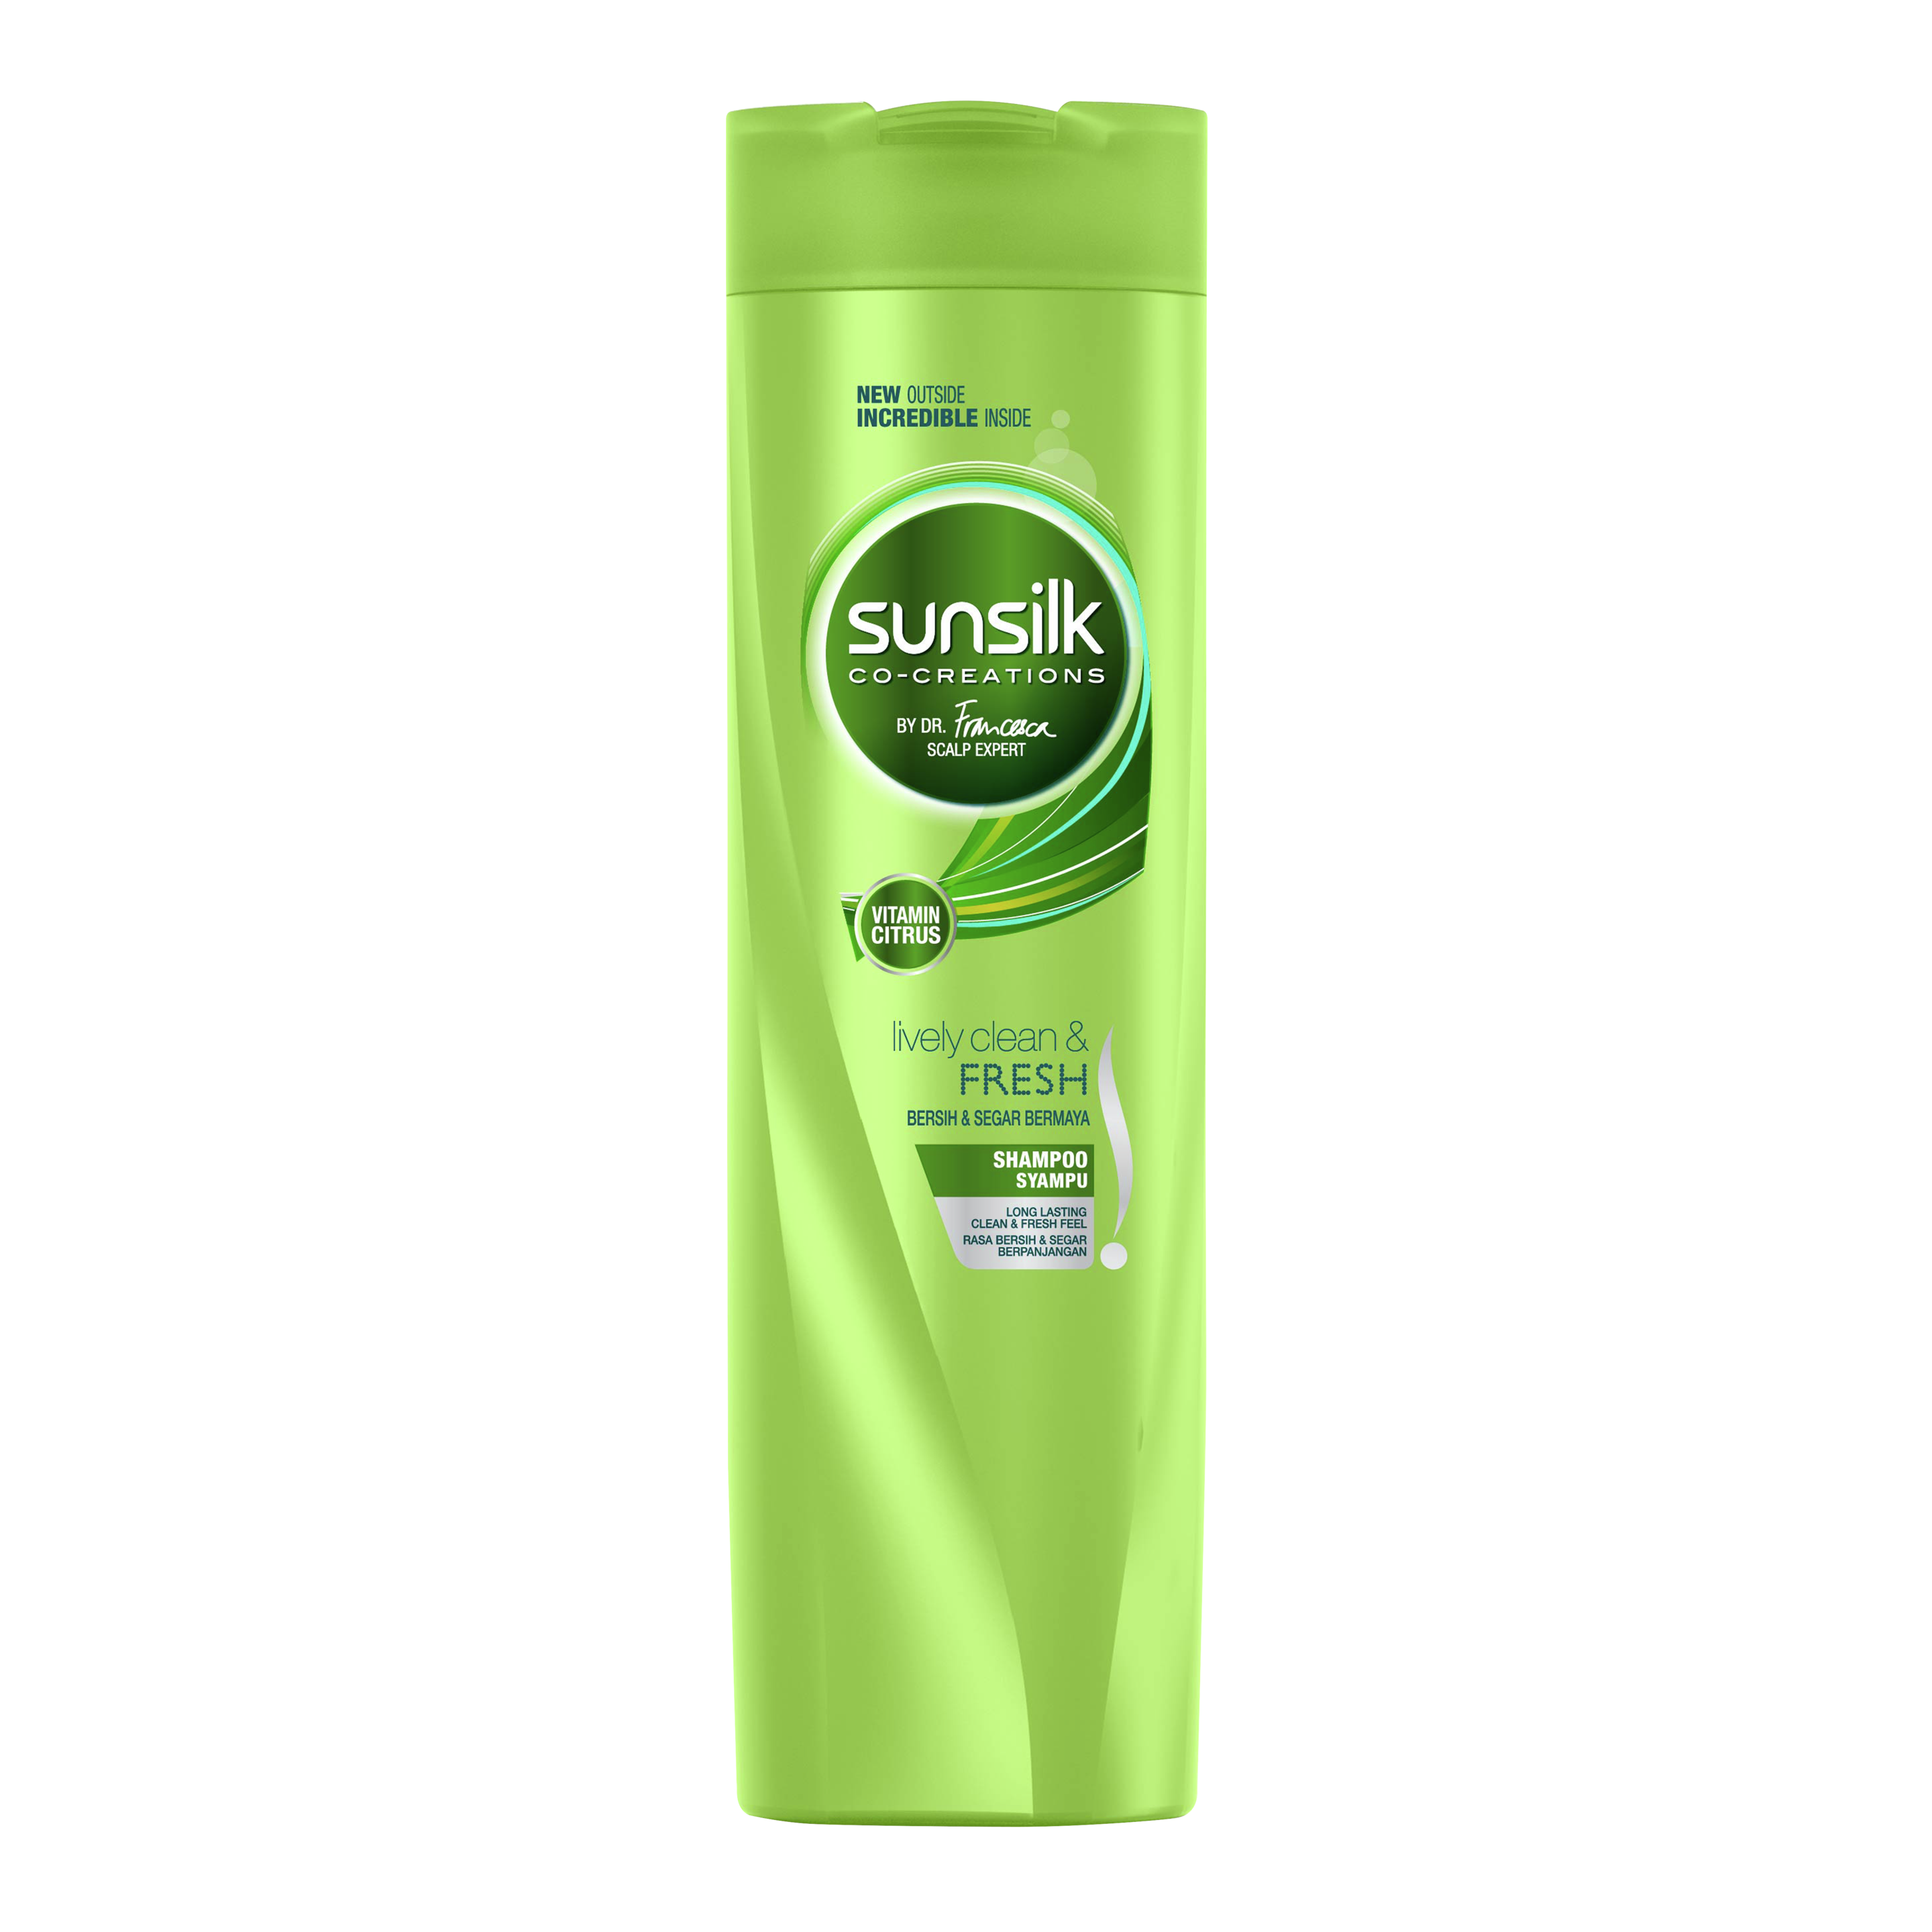 Sunsilk Lively Clean and Fresh Shampoo 320ml front of pack image